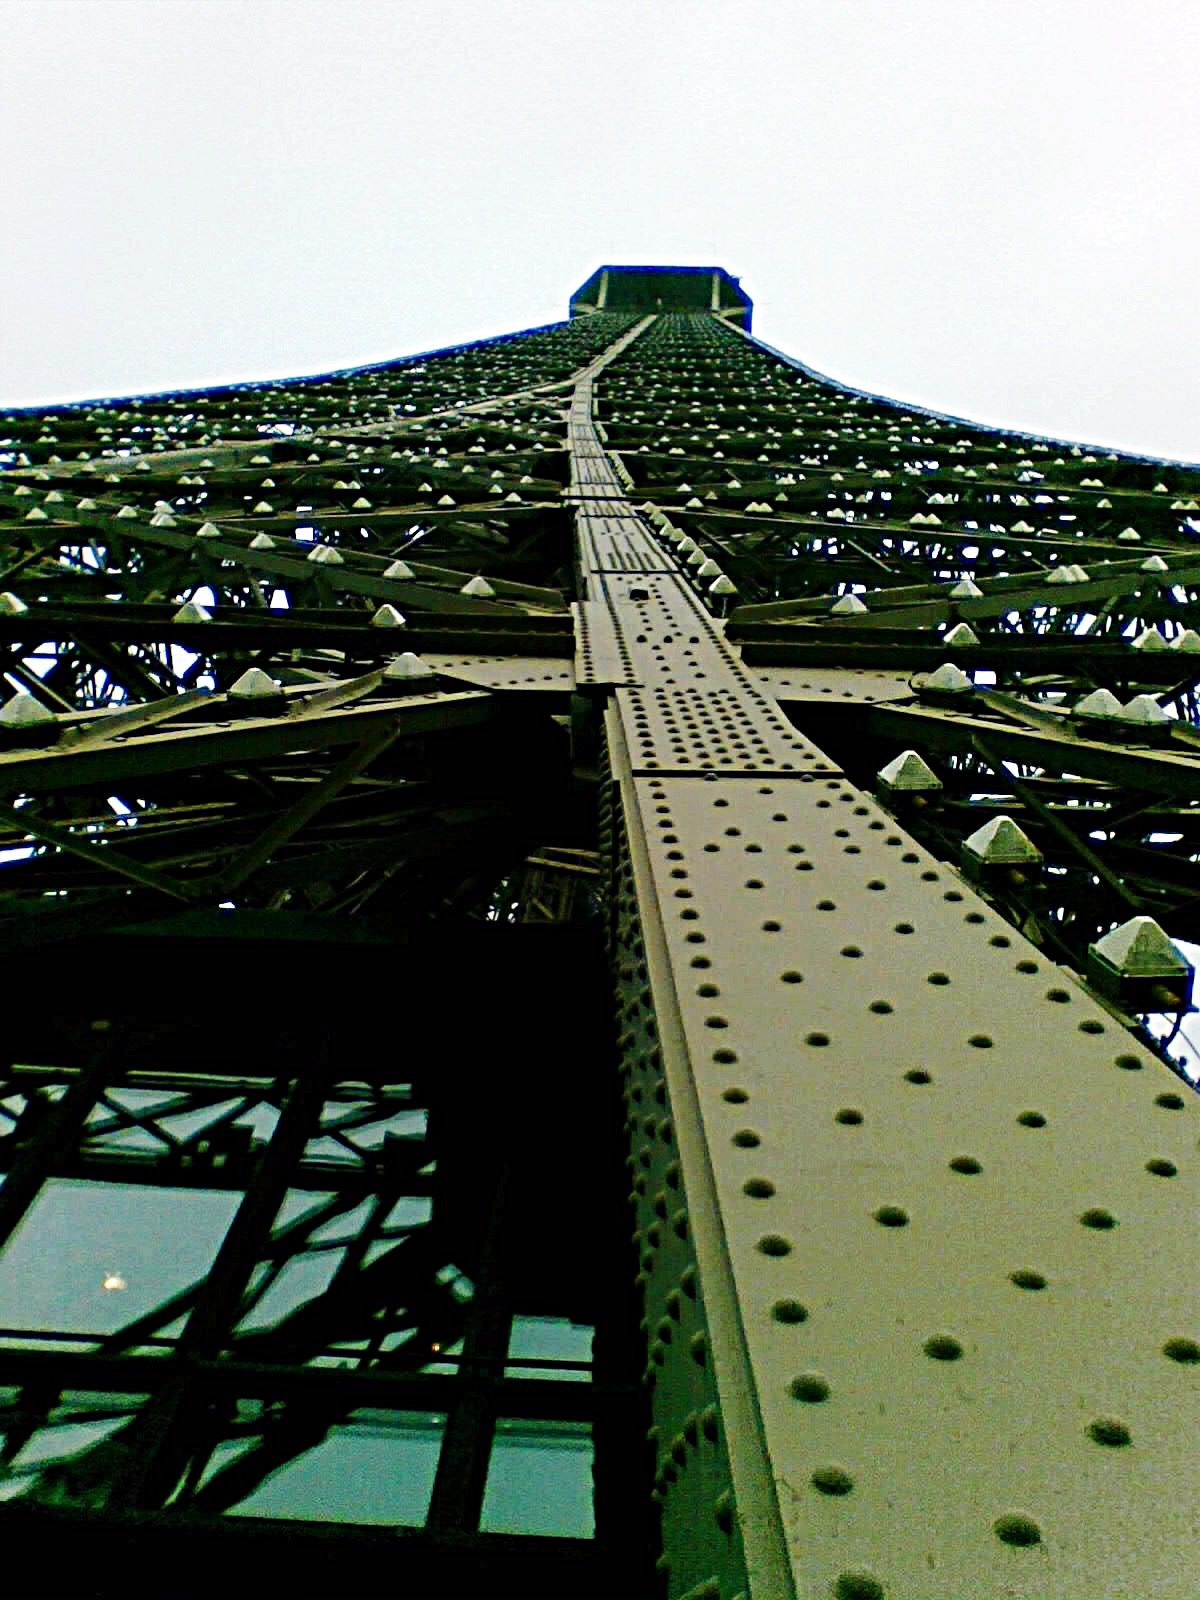 Different angle of the Eiffel Tower taken a few years ago